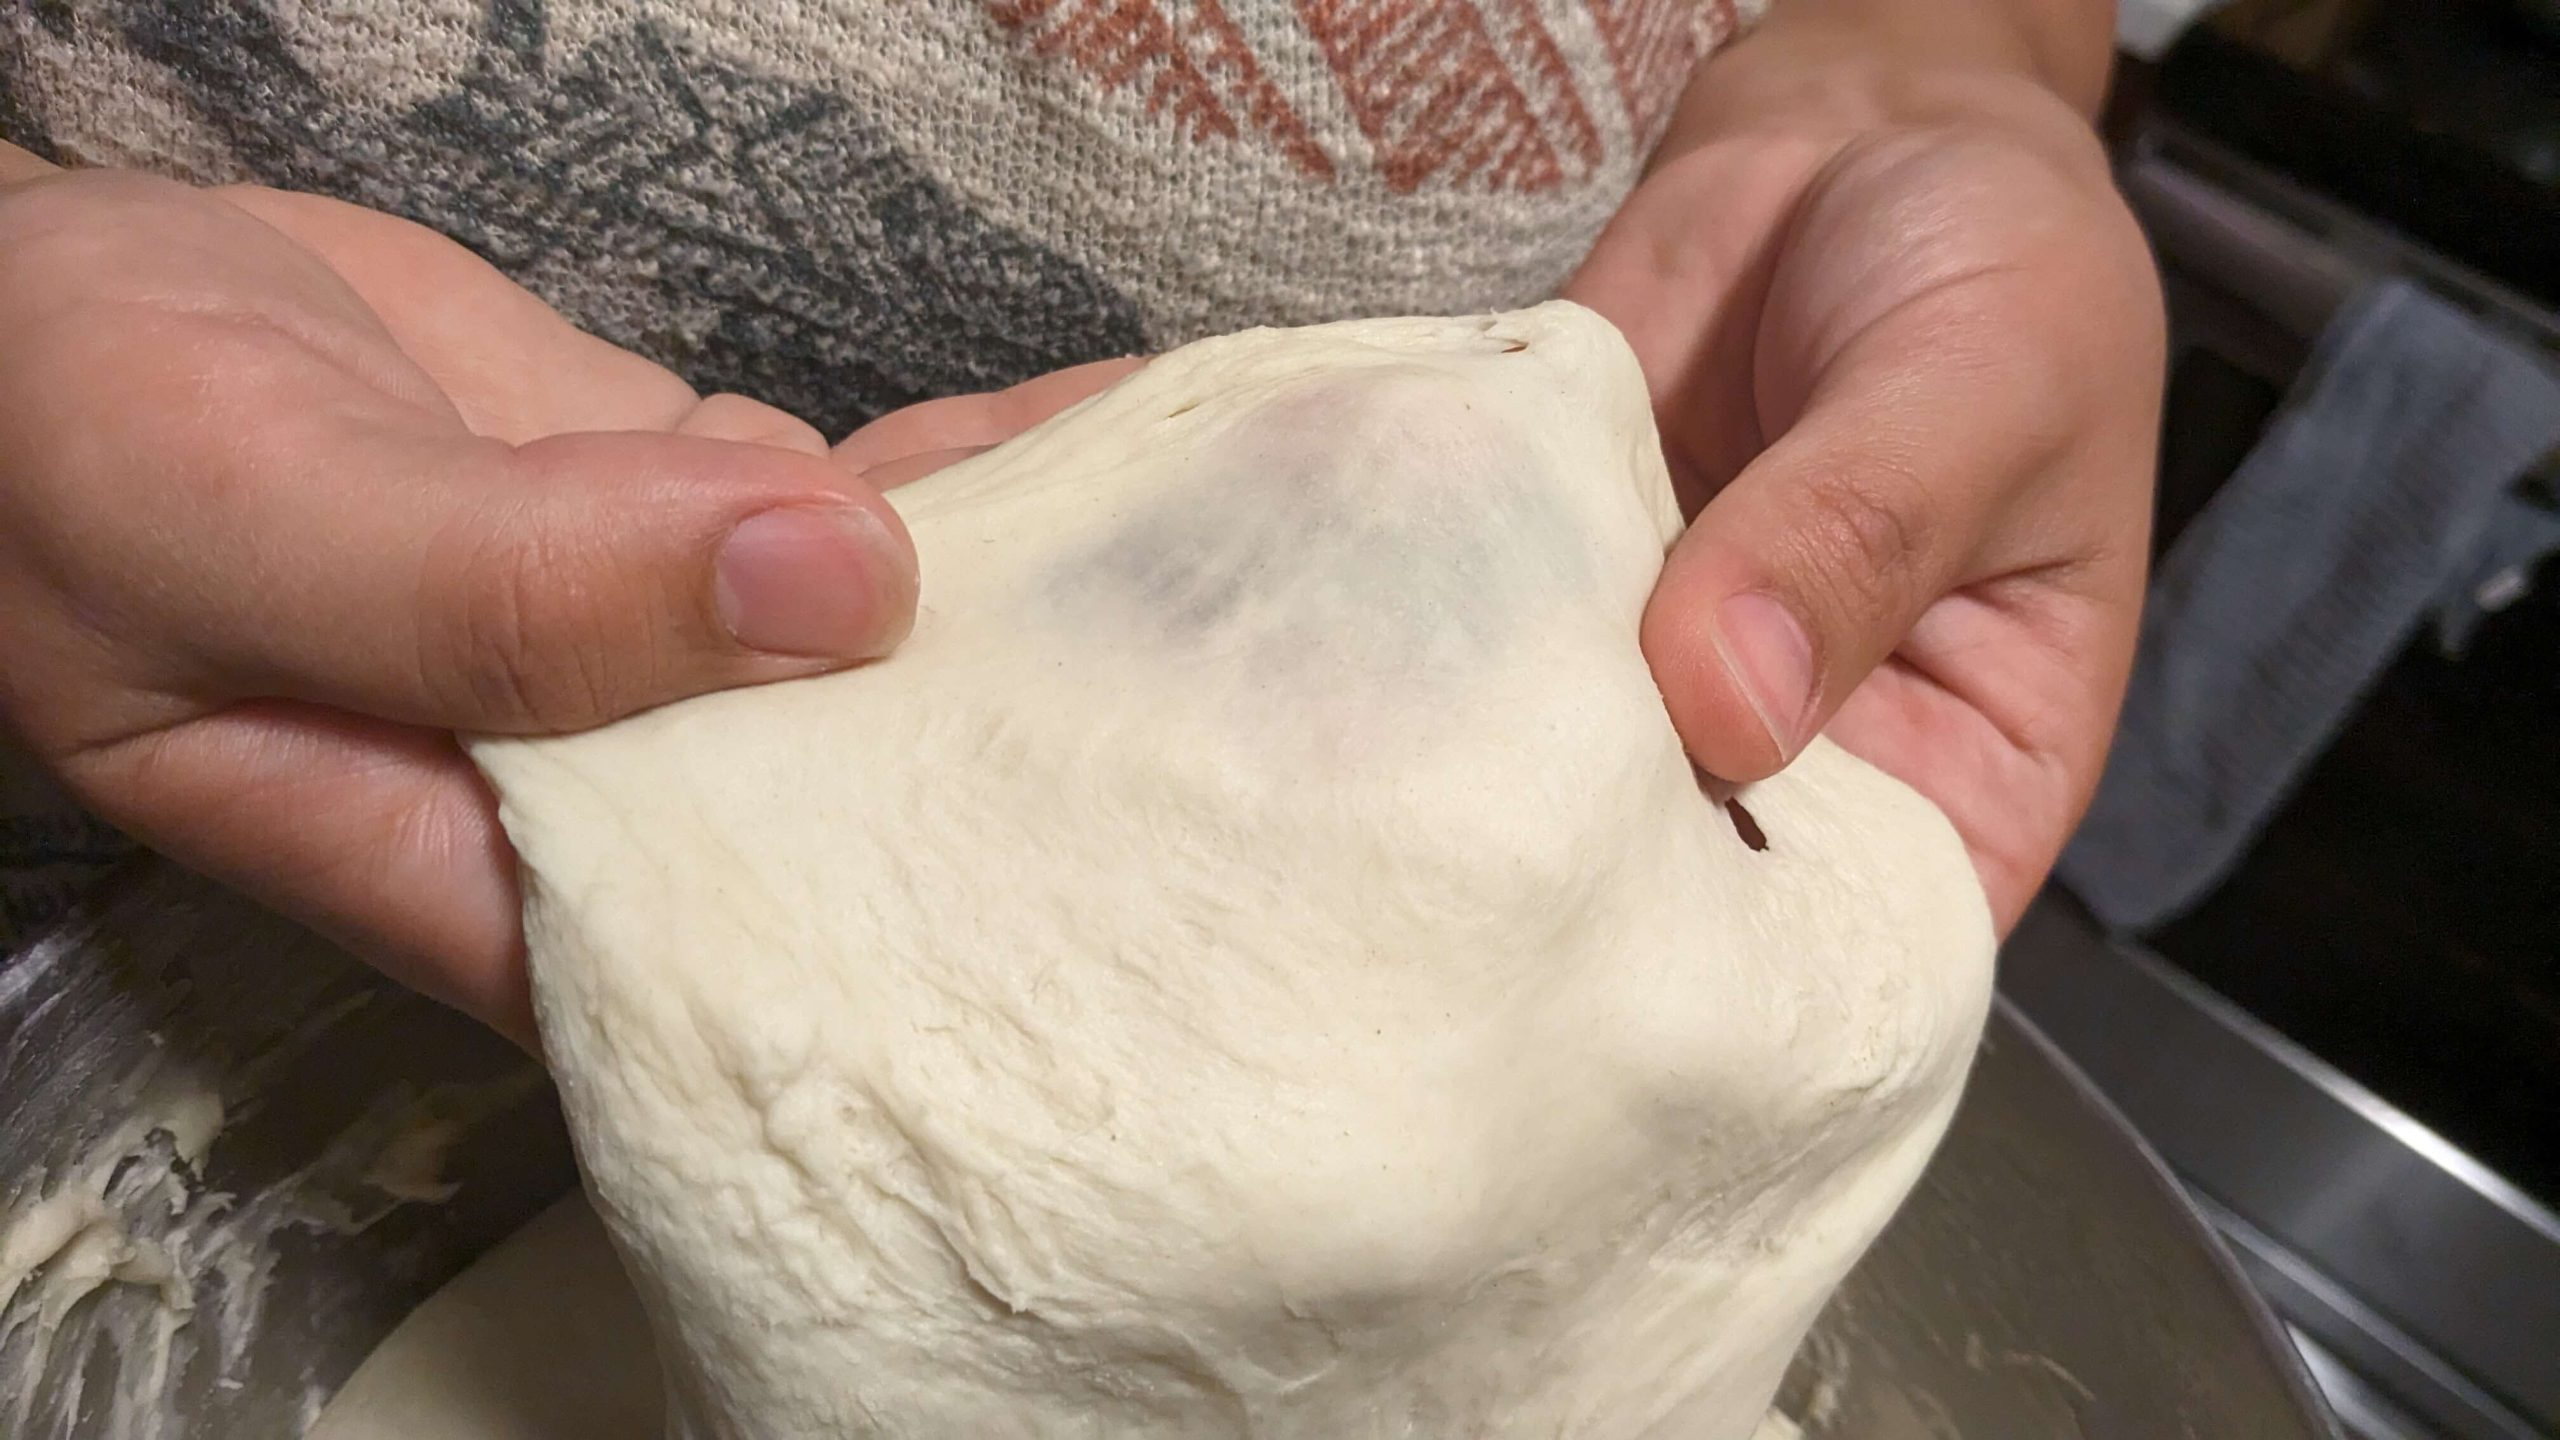 dough that is transparent as it is stretched by a woman